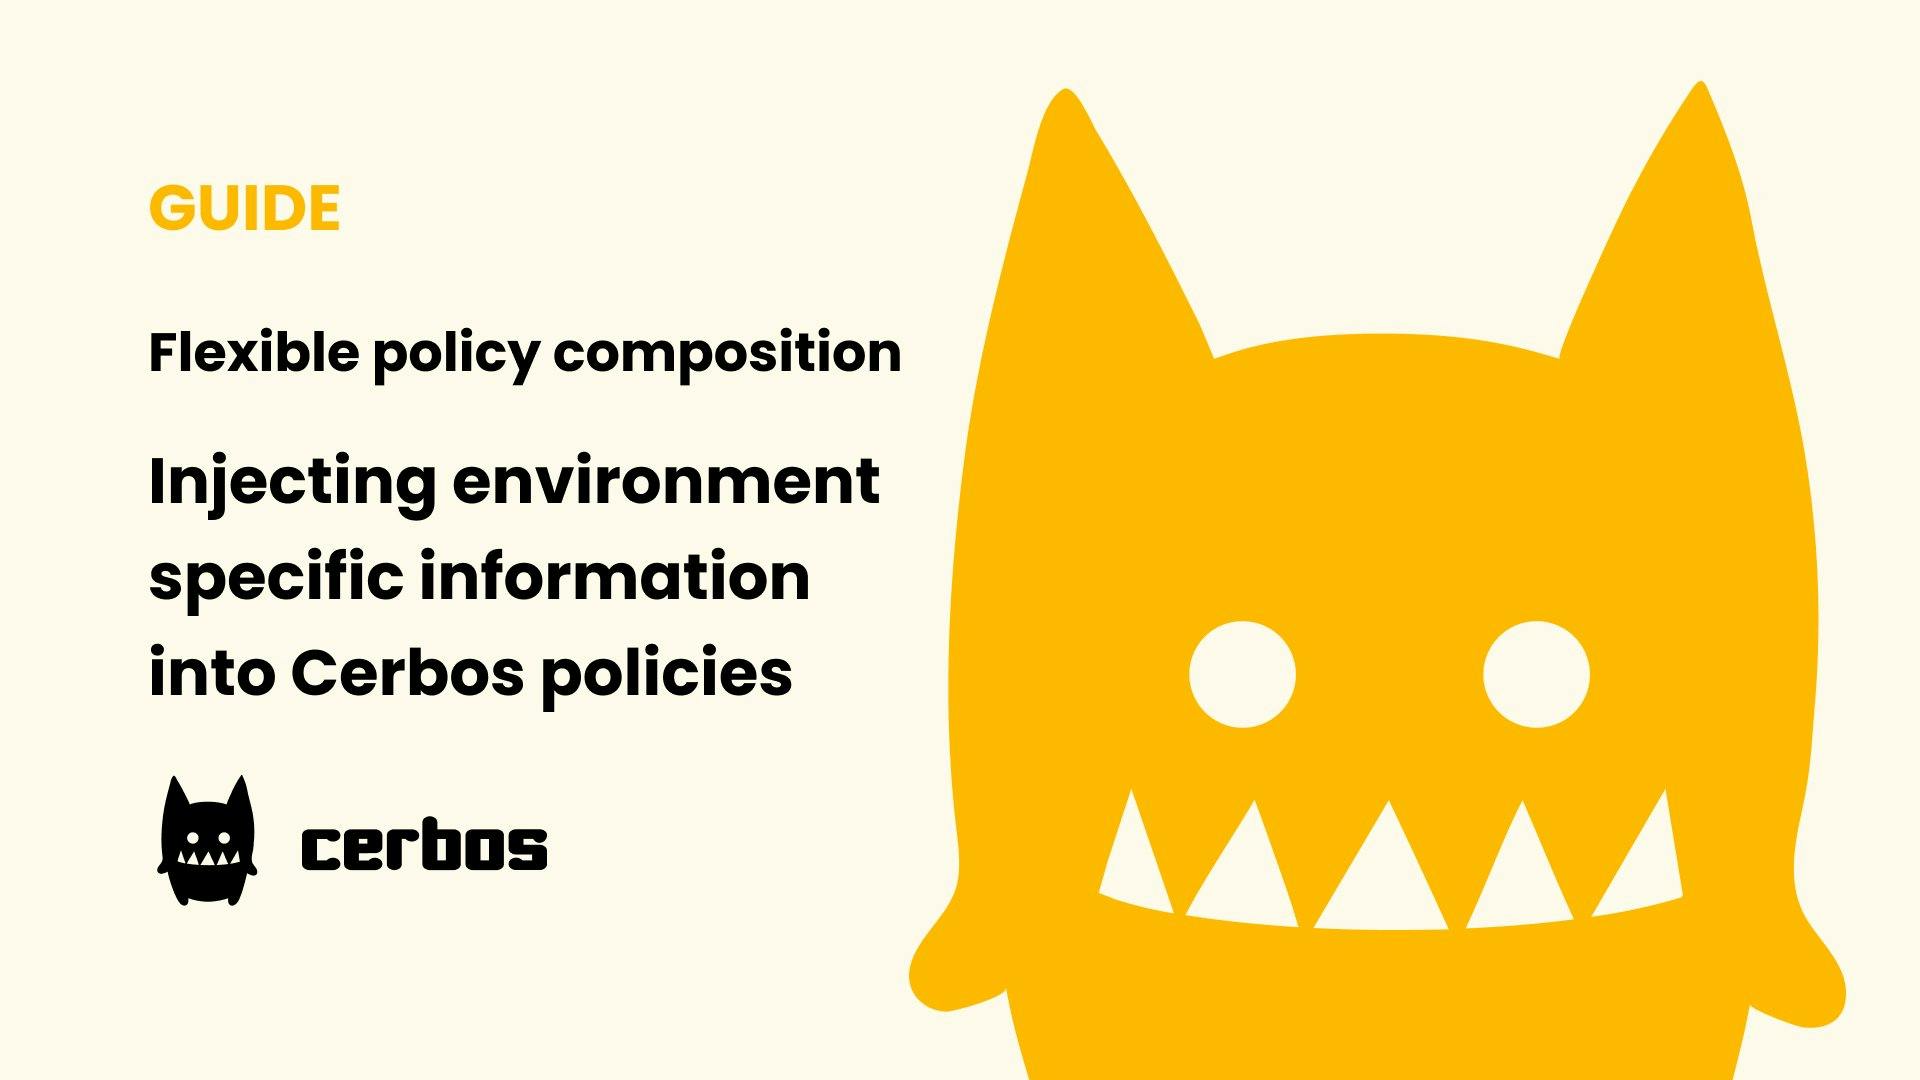 Flexible policy composition - Injecting environment specific information into Cerbos policies